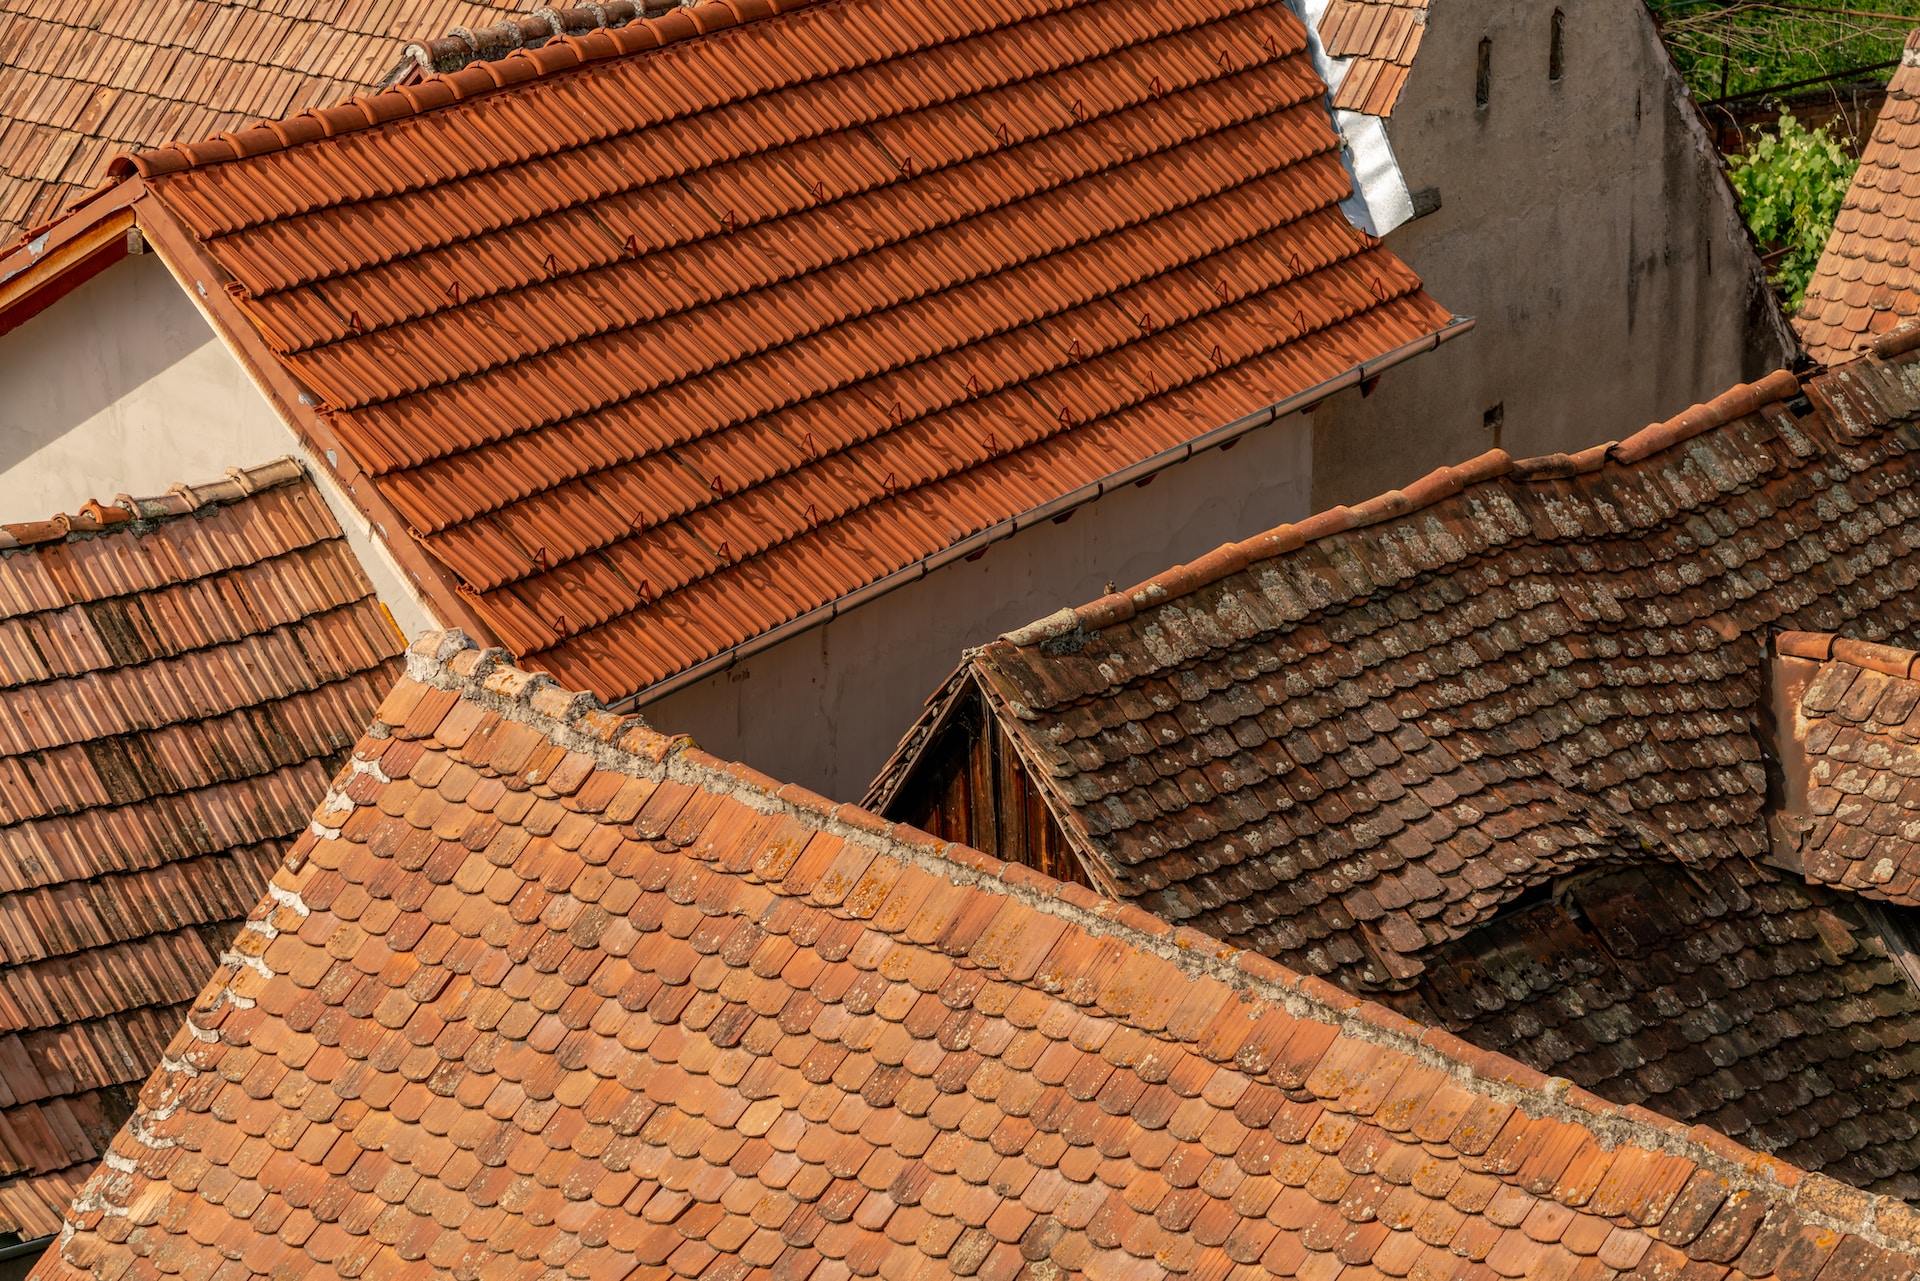 How to Tell Your Roof Has Hail Damage (Part 1)